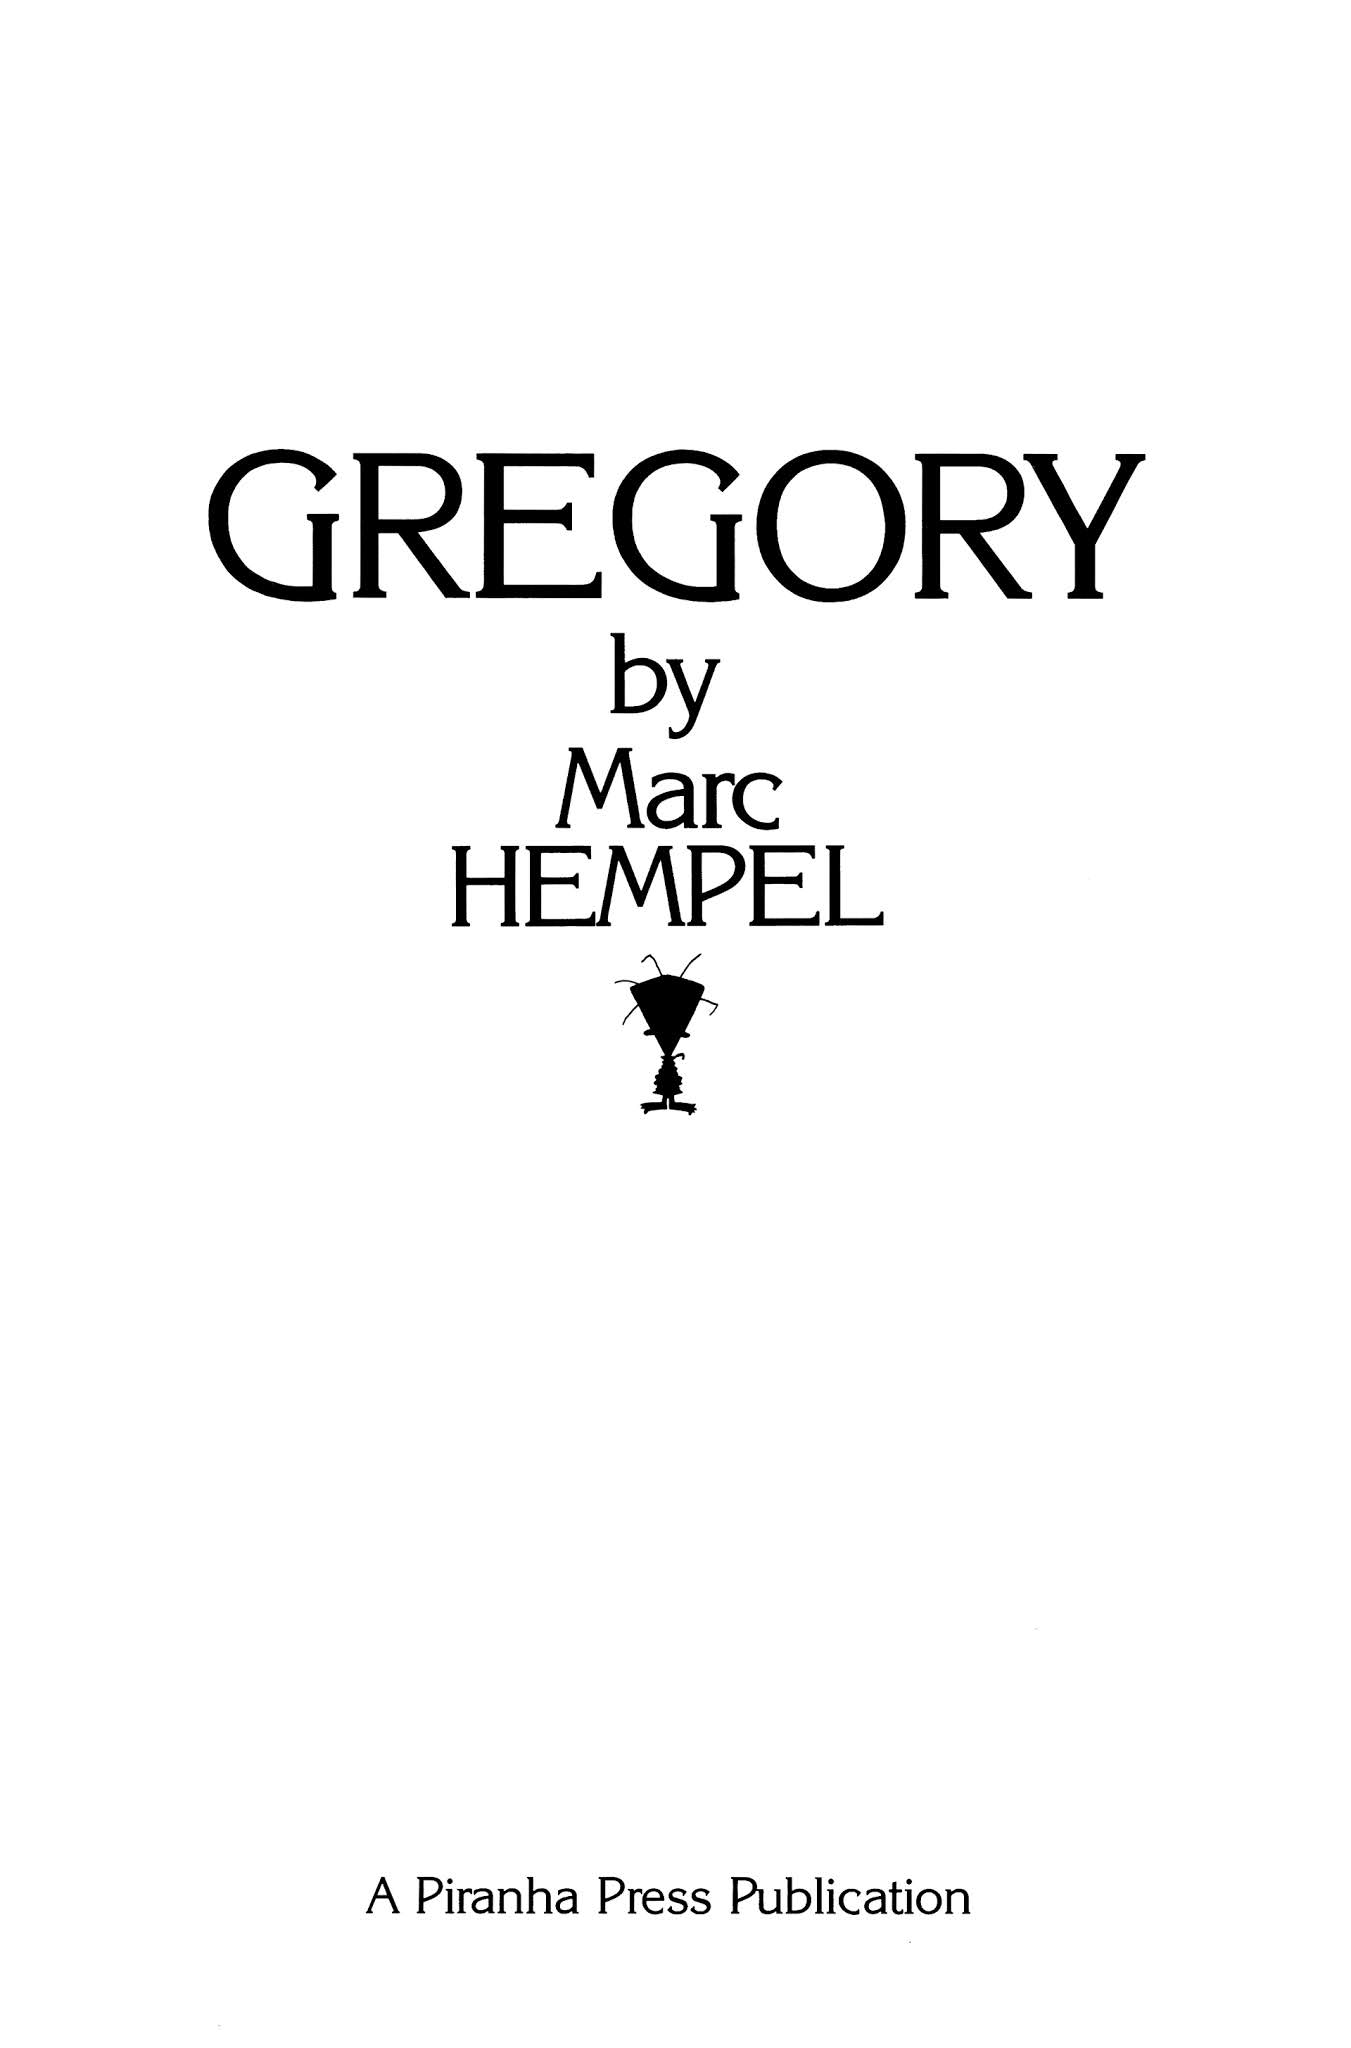 Read online Gregory comic -  Issue # TPB 1 - 3